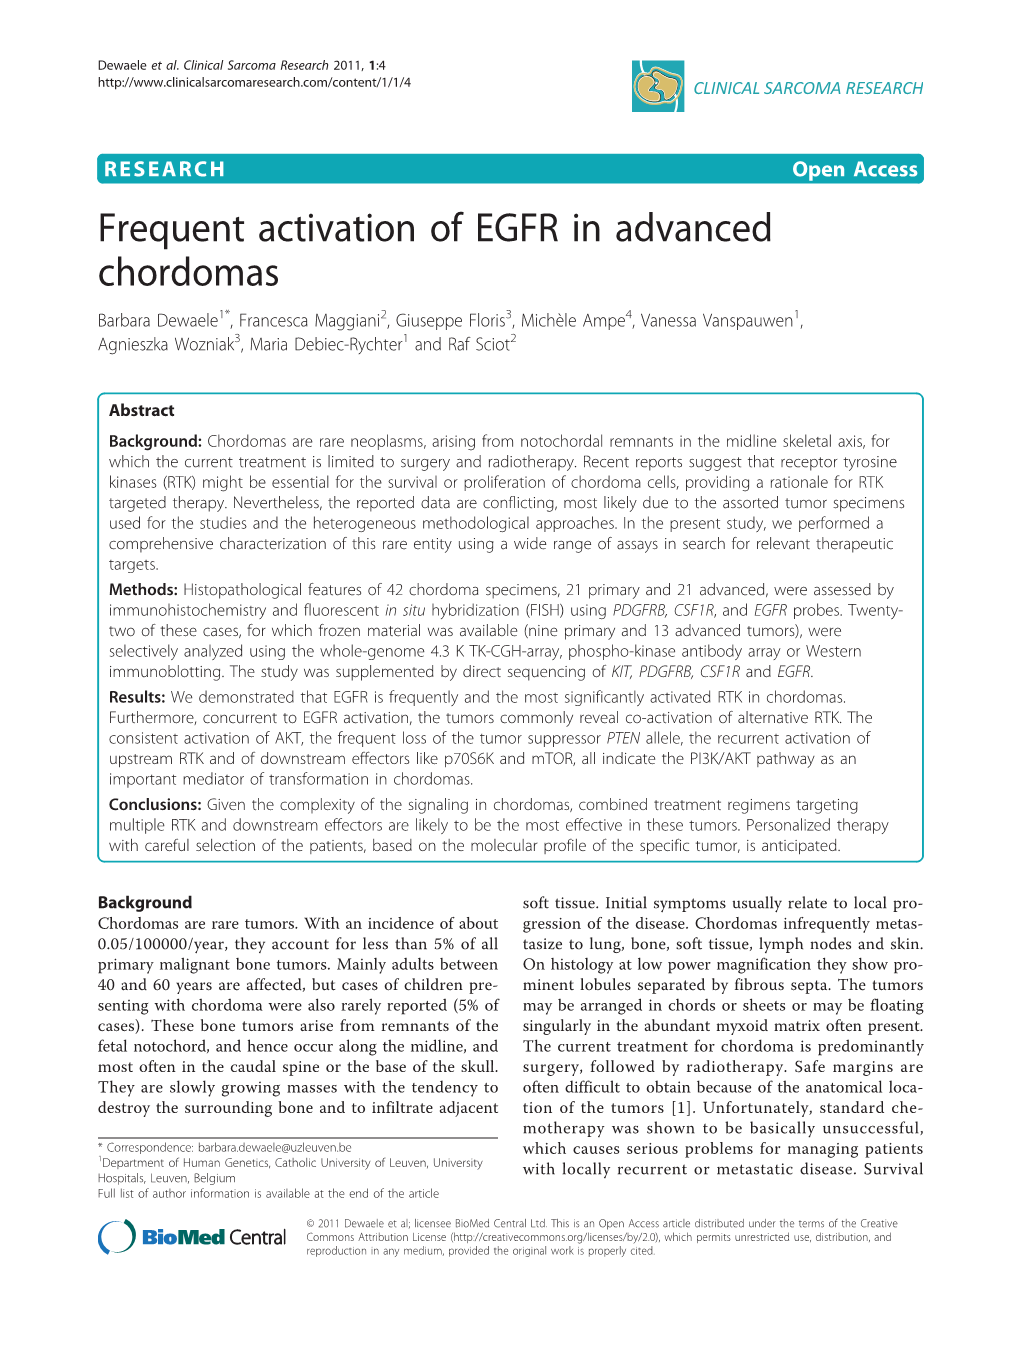 Frequent Activation of EGFR in Advanced Chordomas